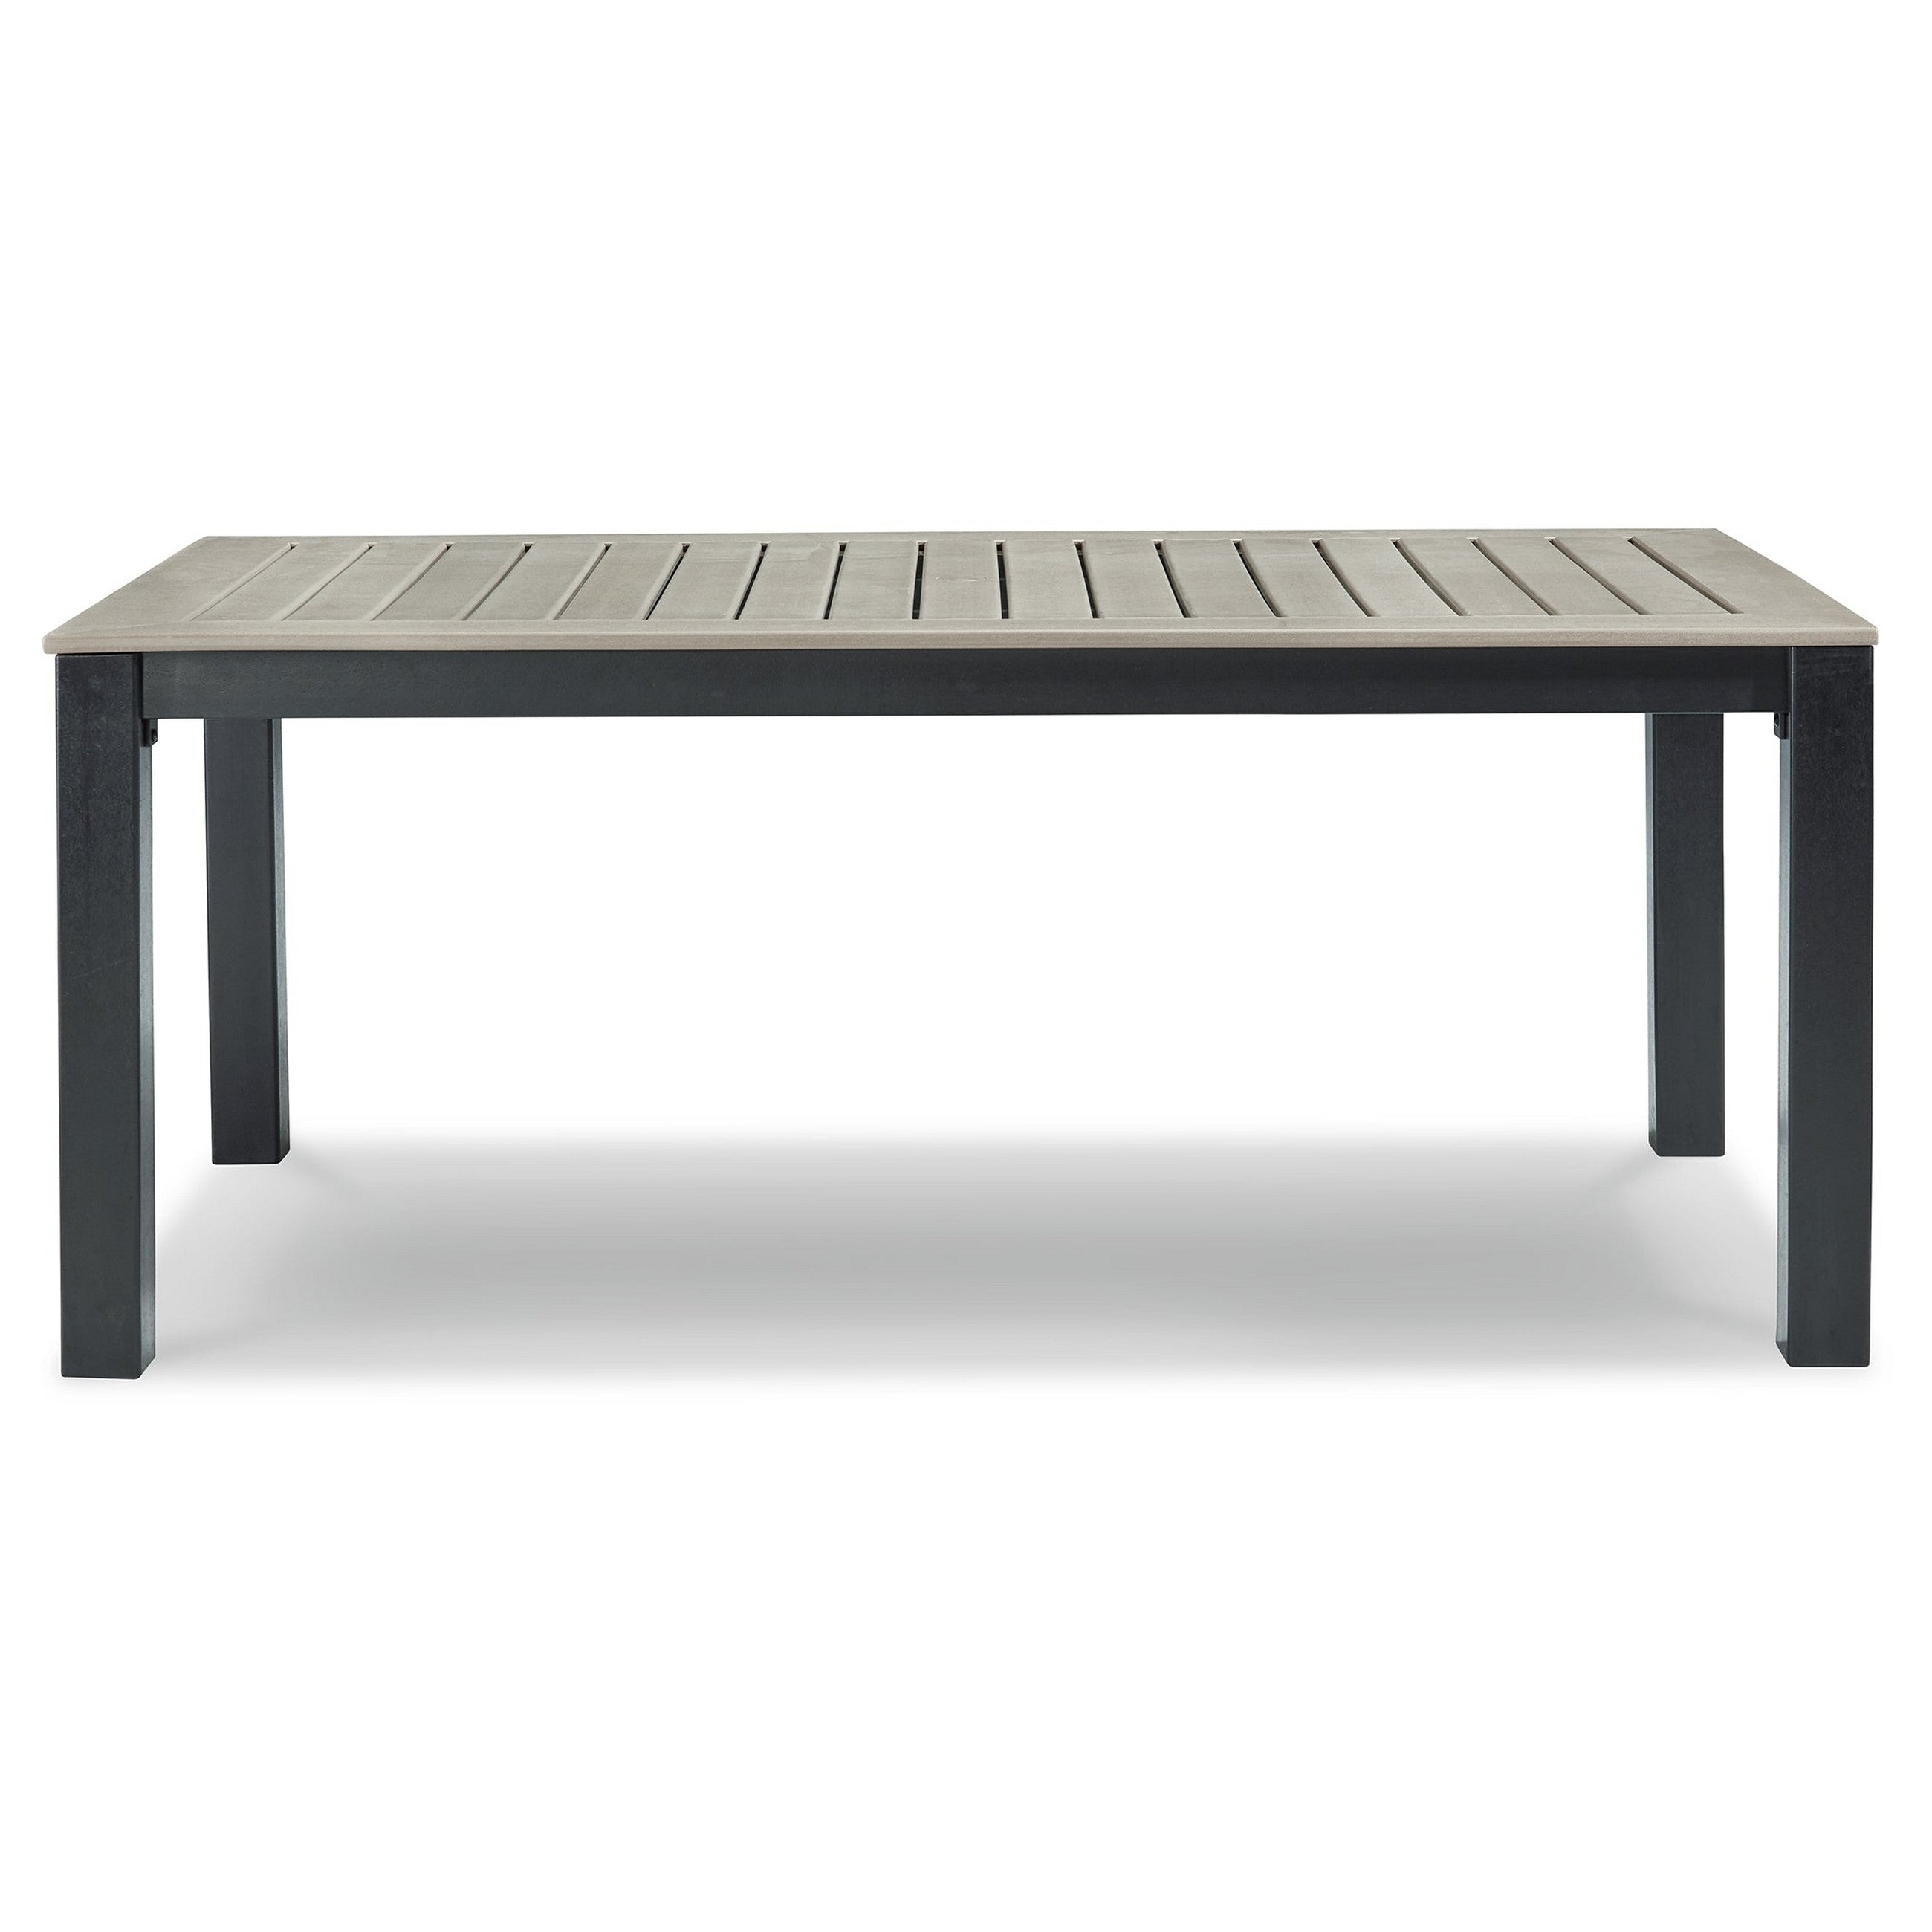 MOUNT VALLEY Outdoor Dining Table Ash-P384-625